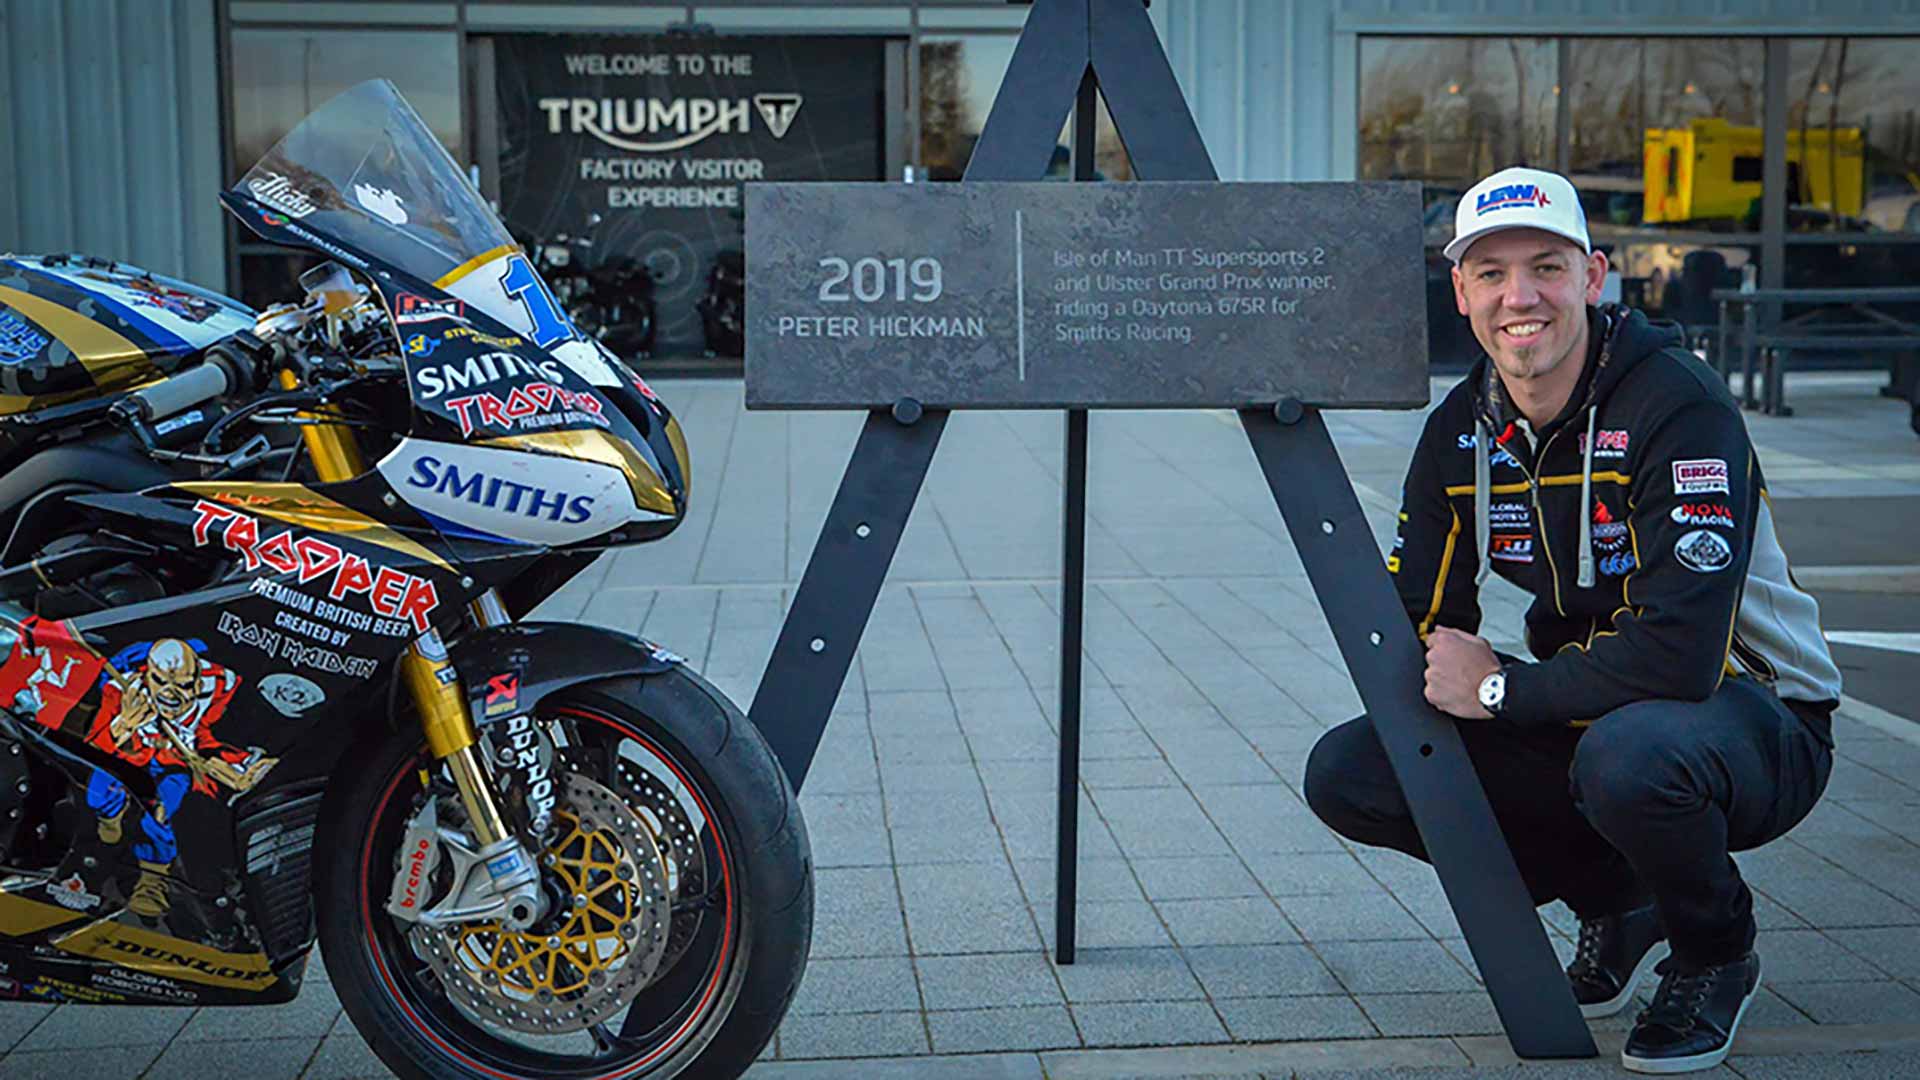 Triumph Factory Visitor guest Peter Hickman